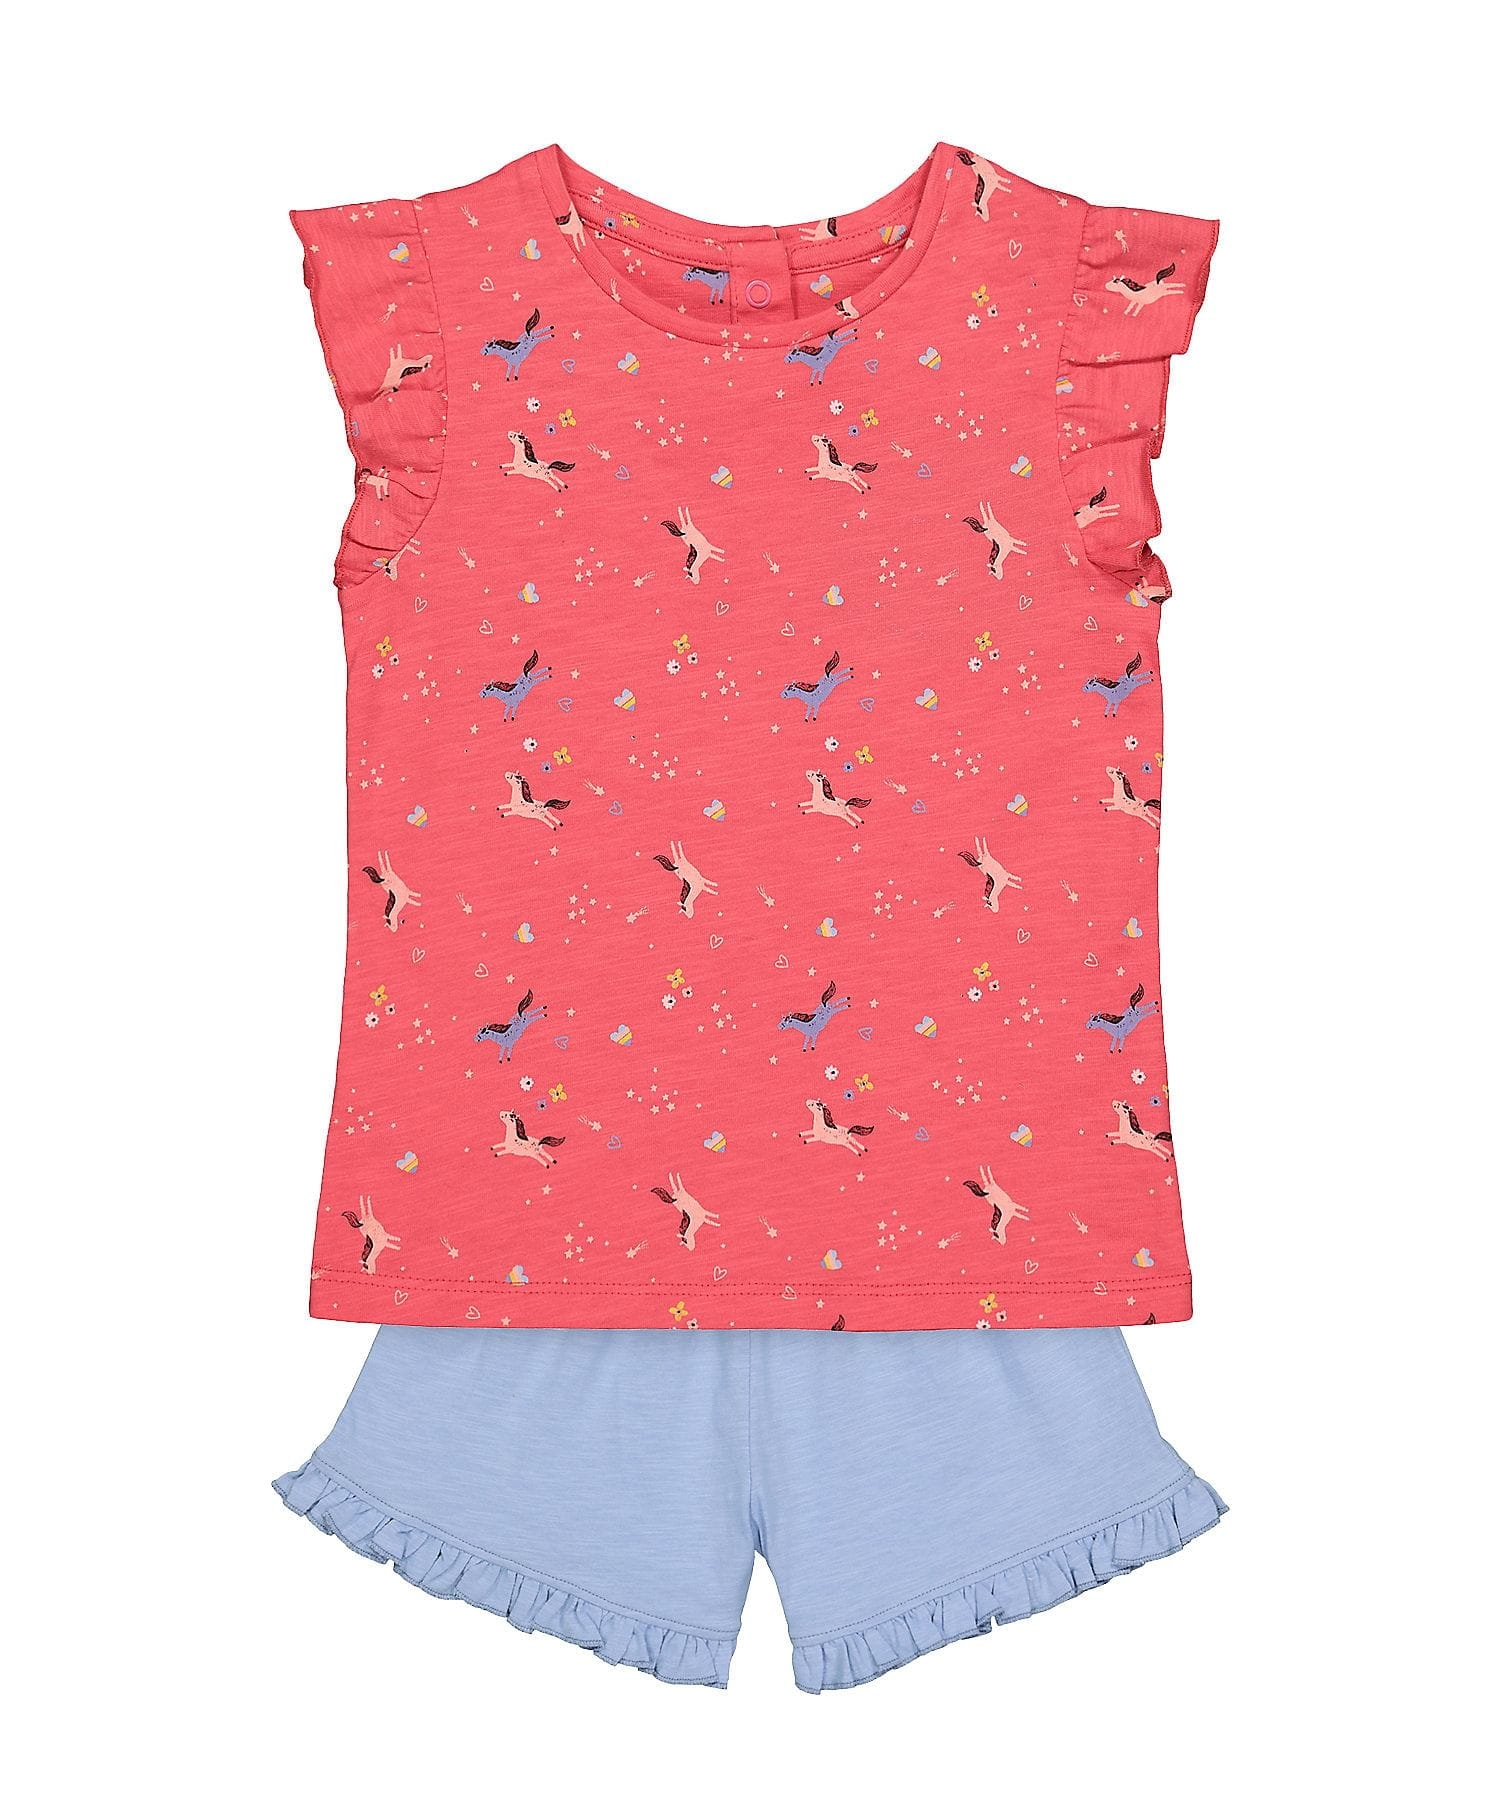 Mothercare | Girls Half Sleeves Shorts Sets  - Pack Of 2 - Pink 0